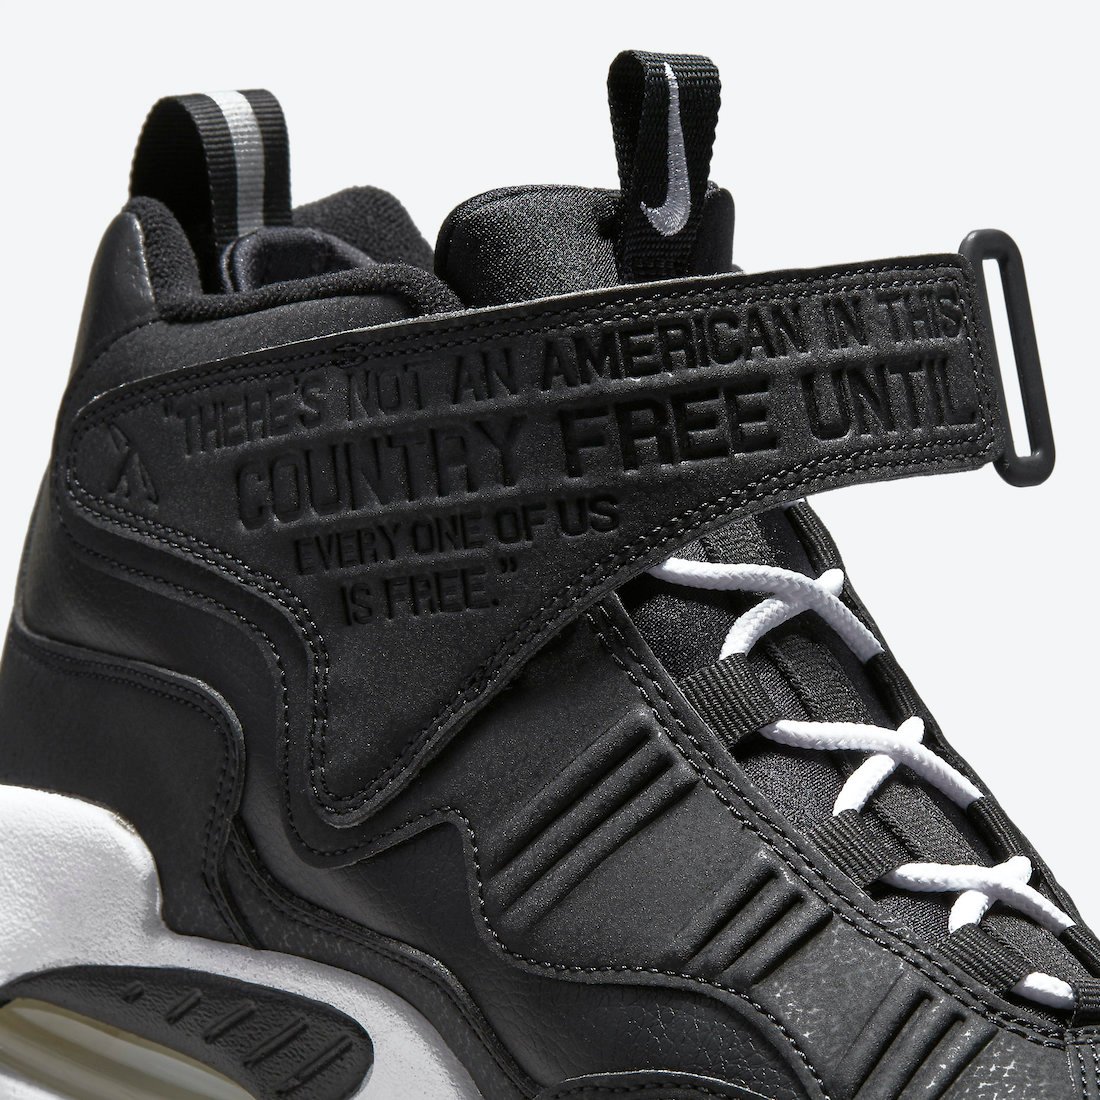 Nike Air Griffey Max 1 Jackie Robinson DM0044-001 Release Date Info